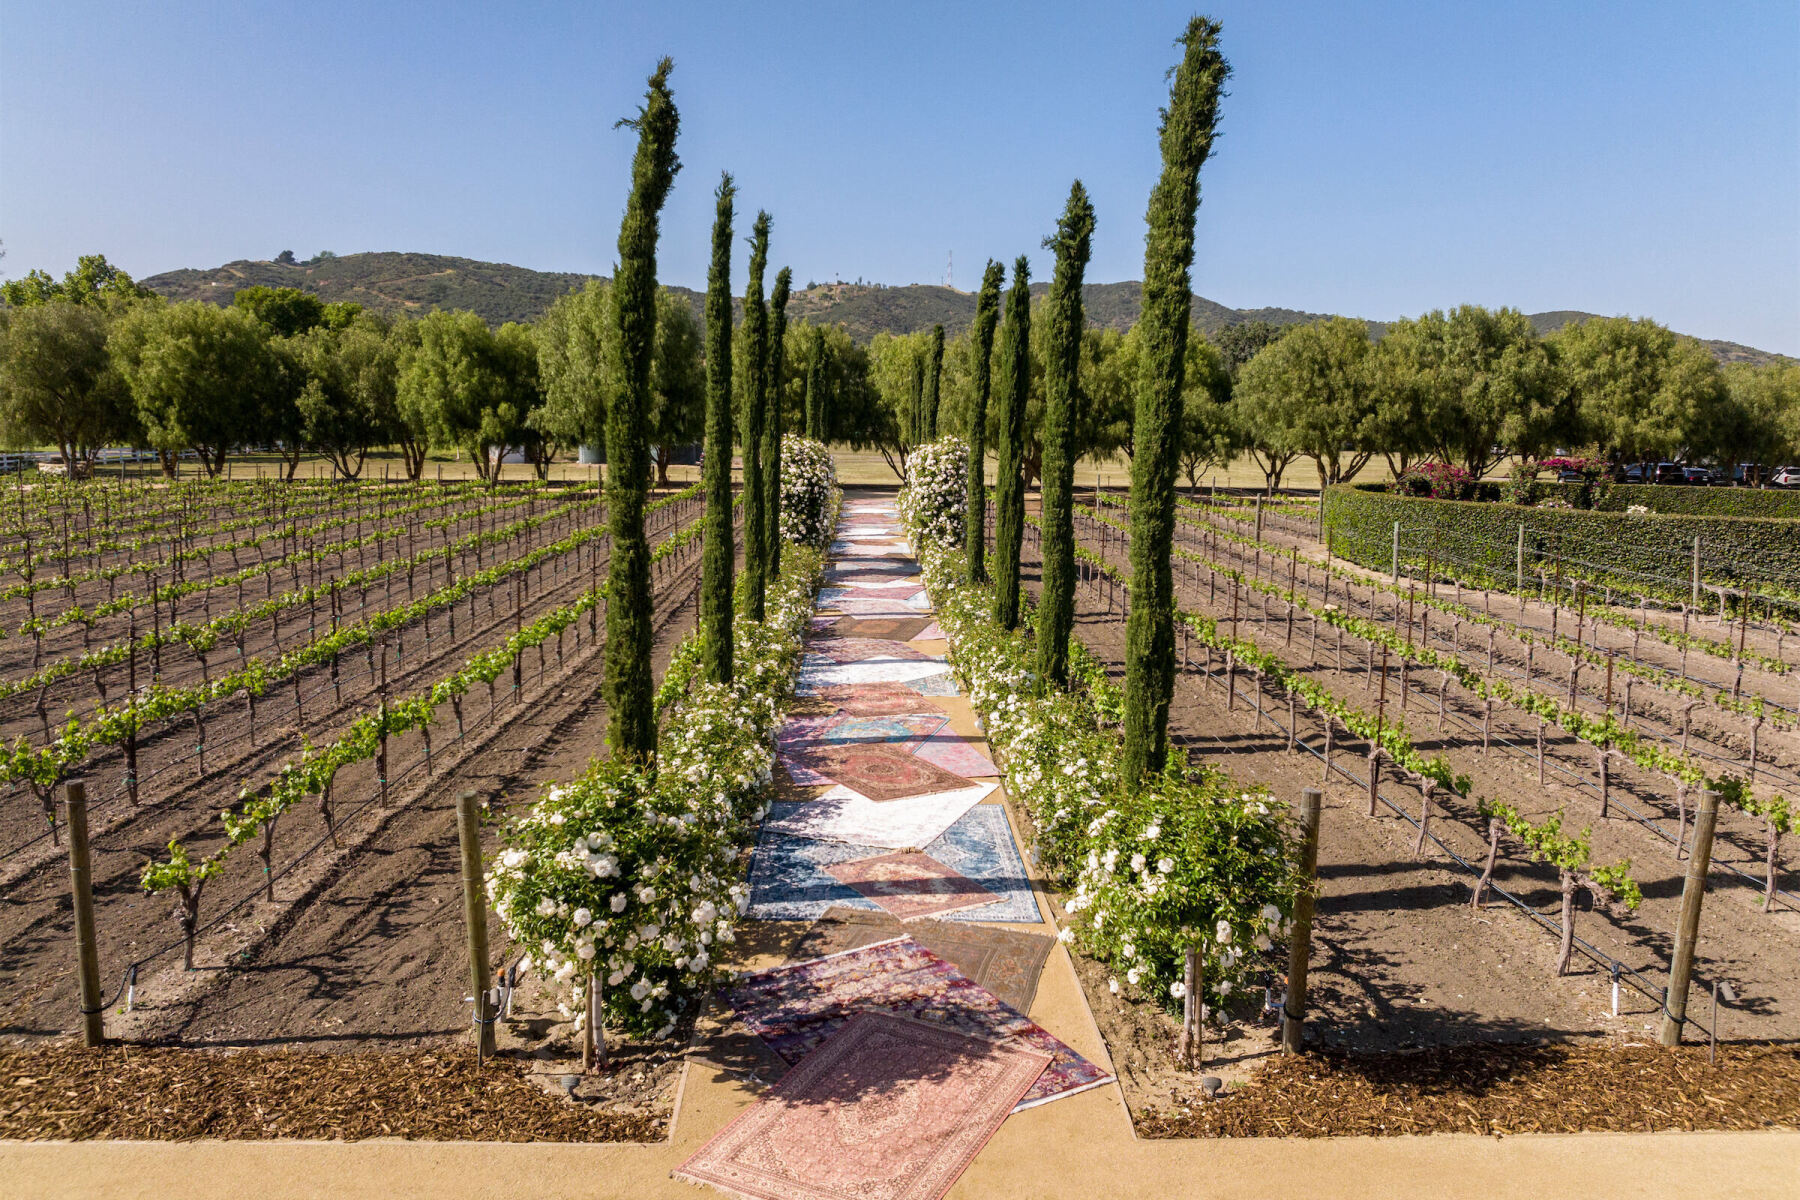 A glam enchanted wedding started on a more bohemian note with a rug-lined walkway through a vineyard to the ceremony.